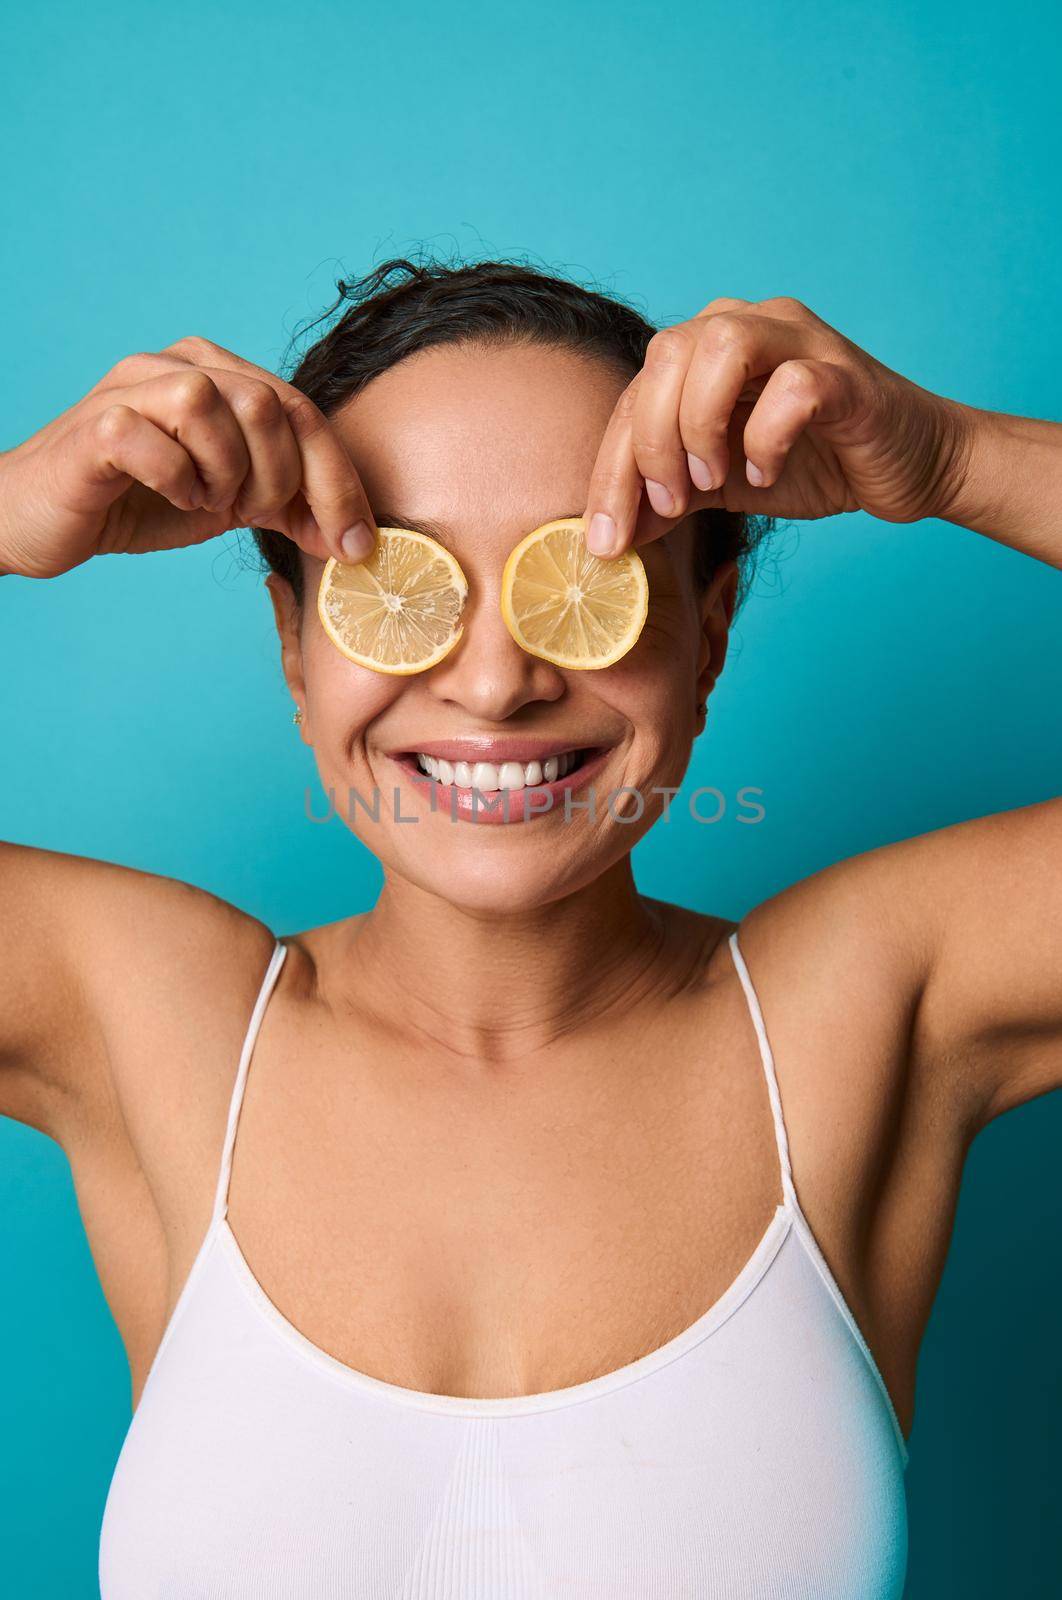 Natural beauty young attractive woman with healthy perfect fresh skin covers her eyes with half a lemon, smiles beautiful white toothy smile isolated on bright blue background with copy space for ads by artgf